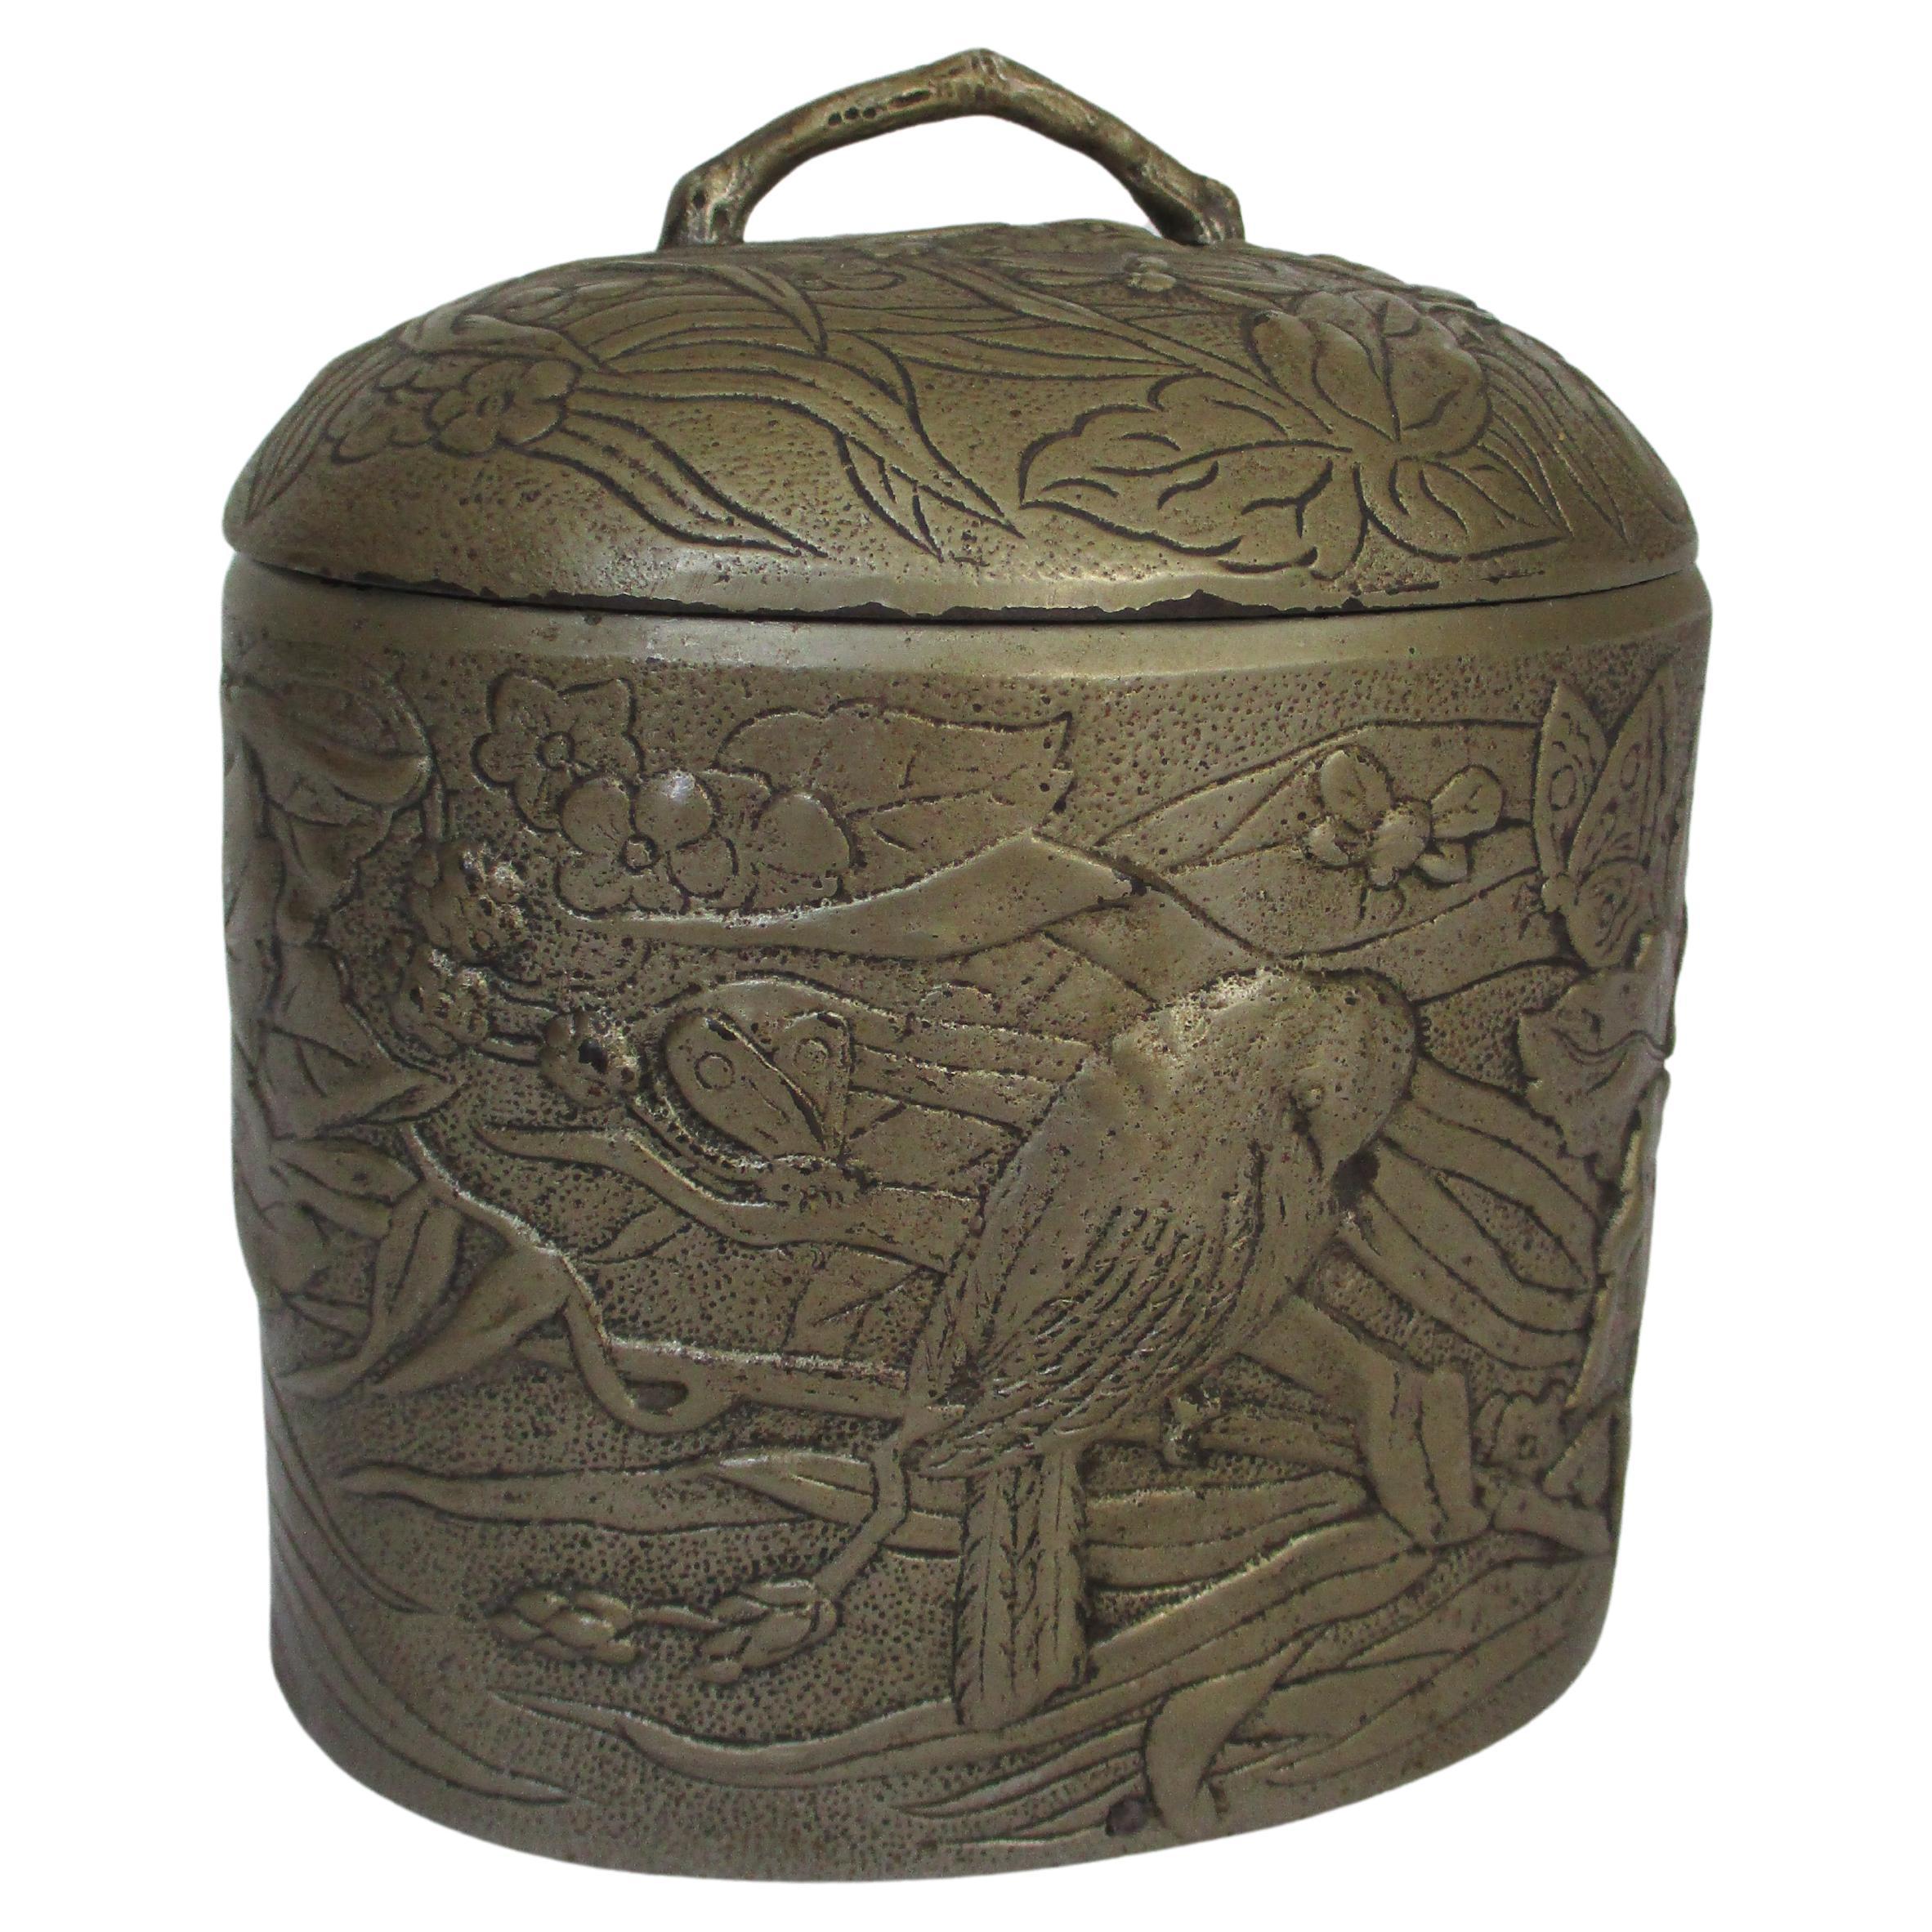 Tobacco pot / Tea Caddy Japanese / Chinese Style cast iron